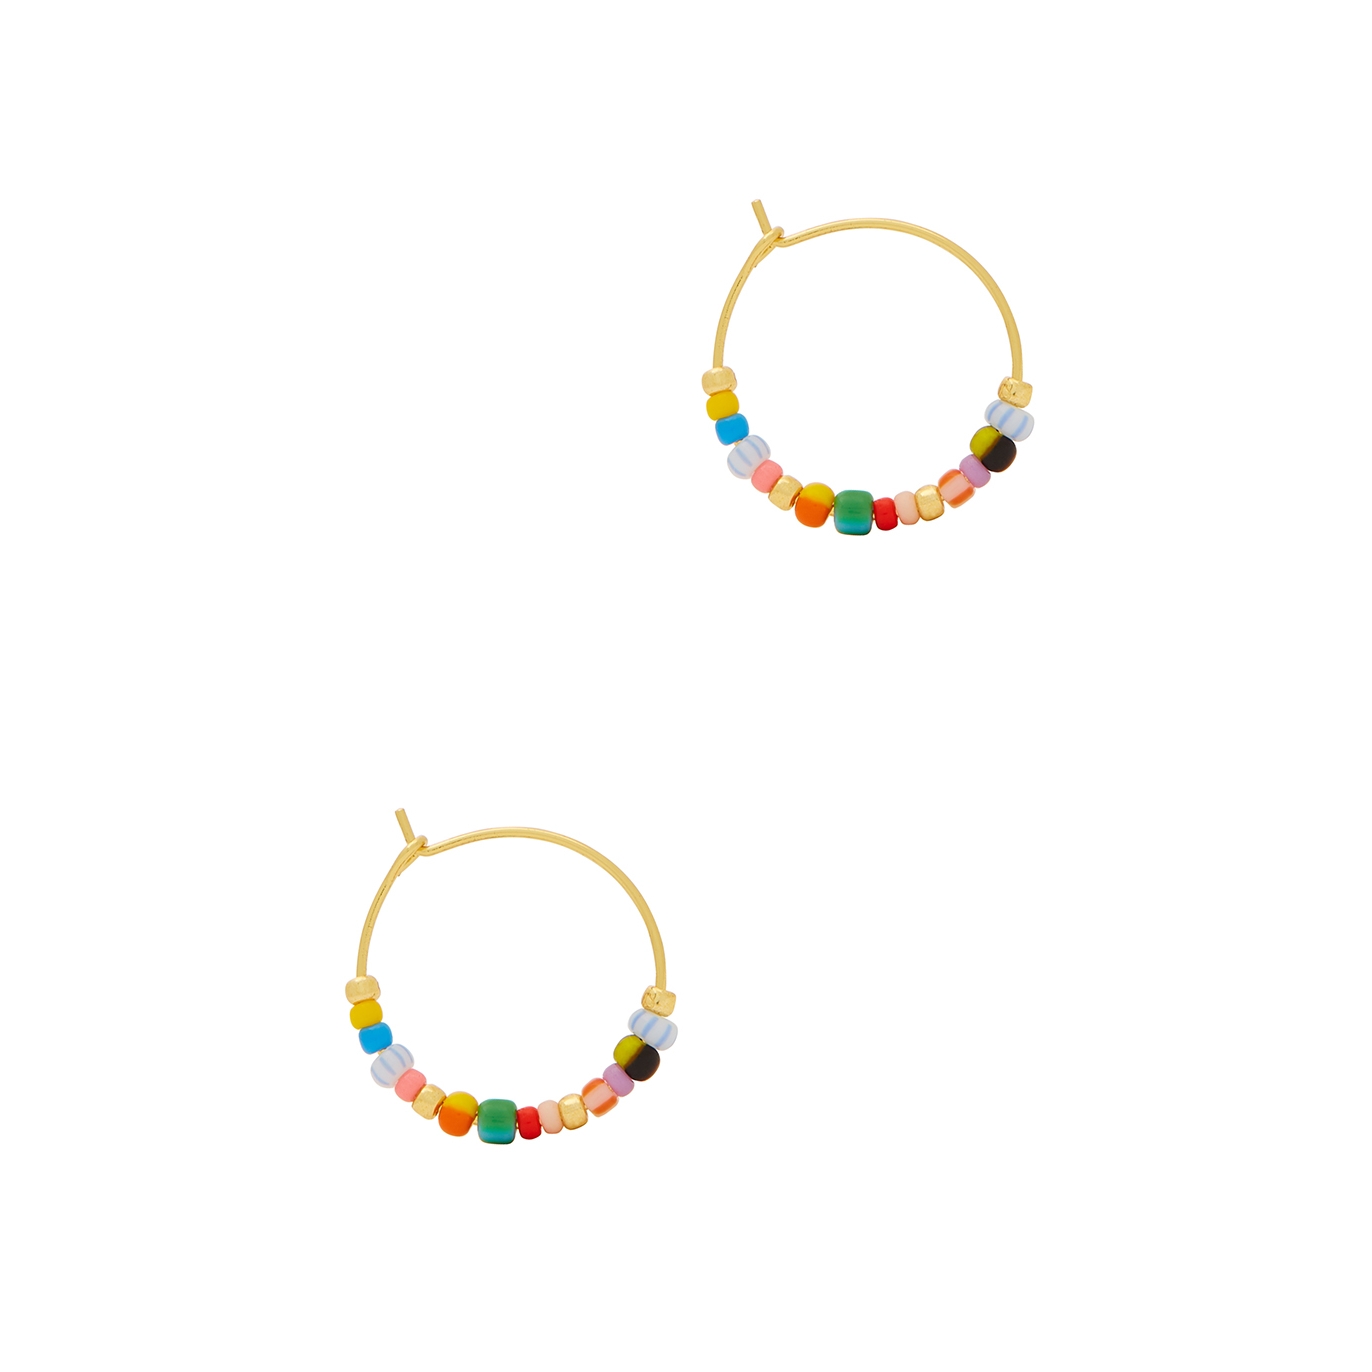 Anni LU Golden Alaia 18kt Gold-plated Hoop Earrings - Multicoloured - One Size